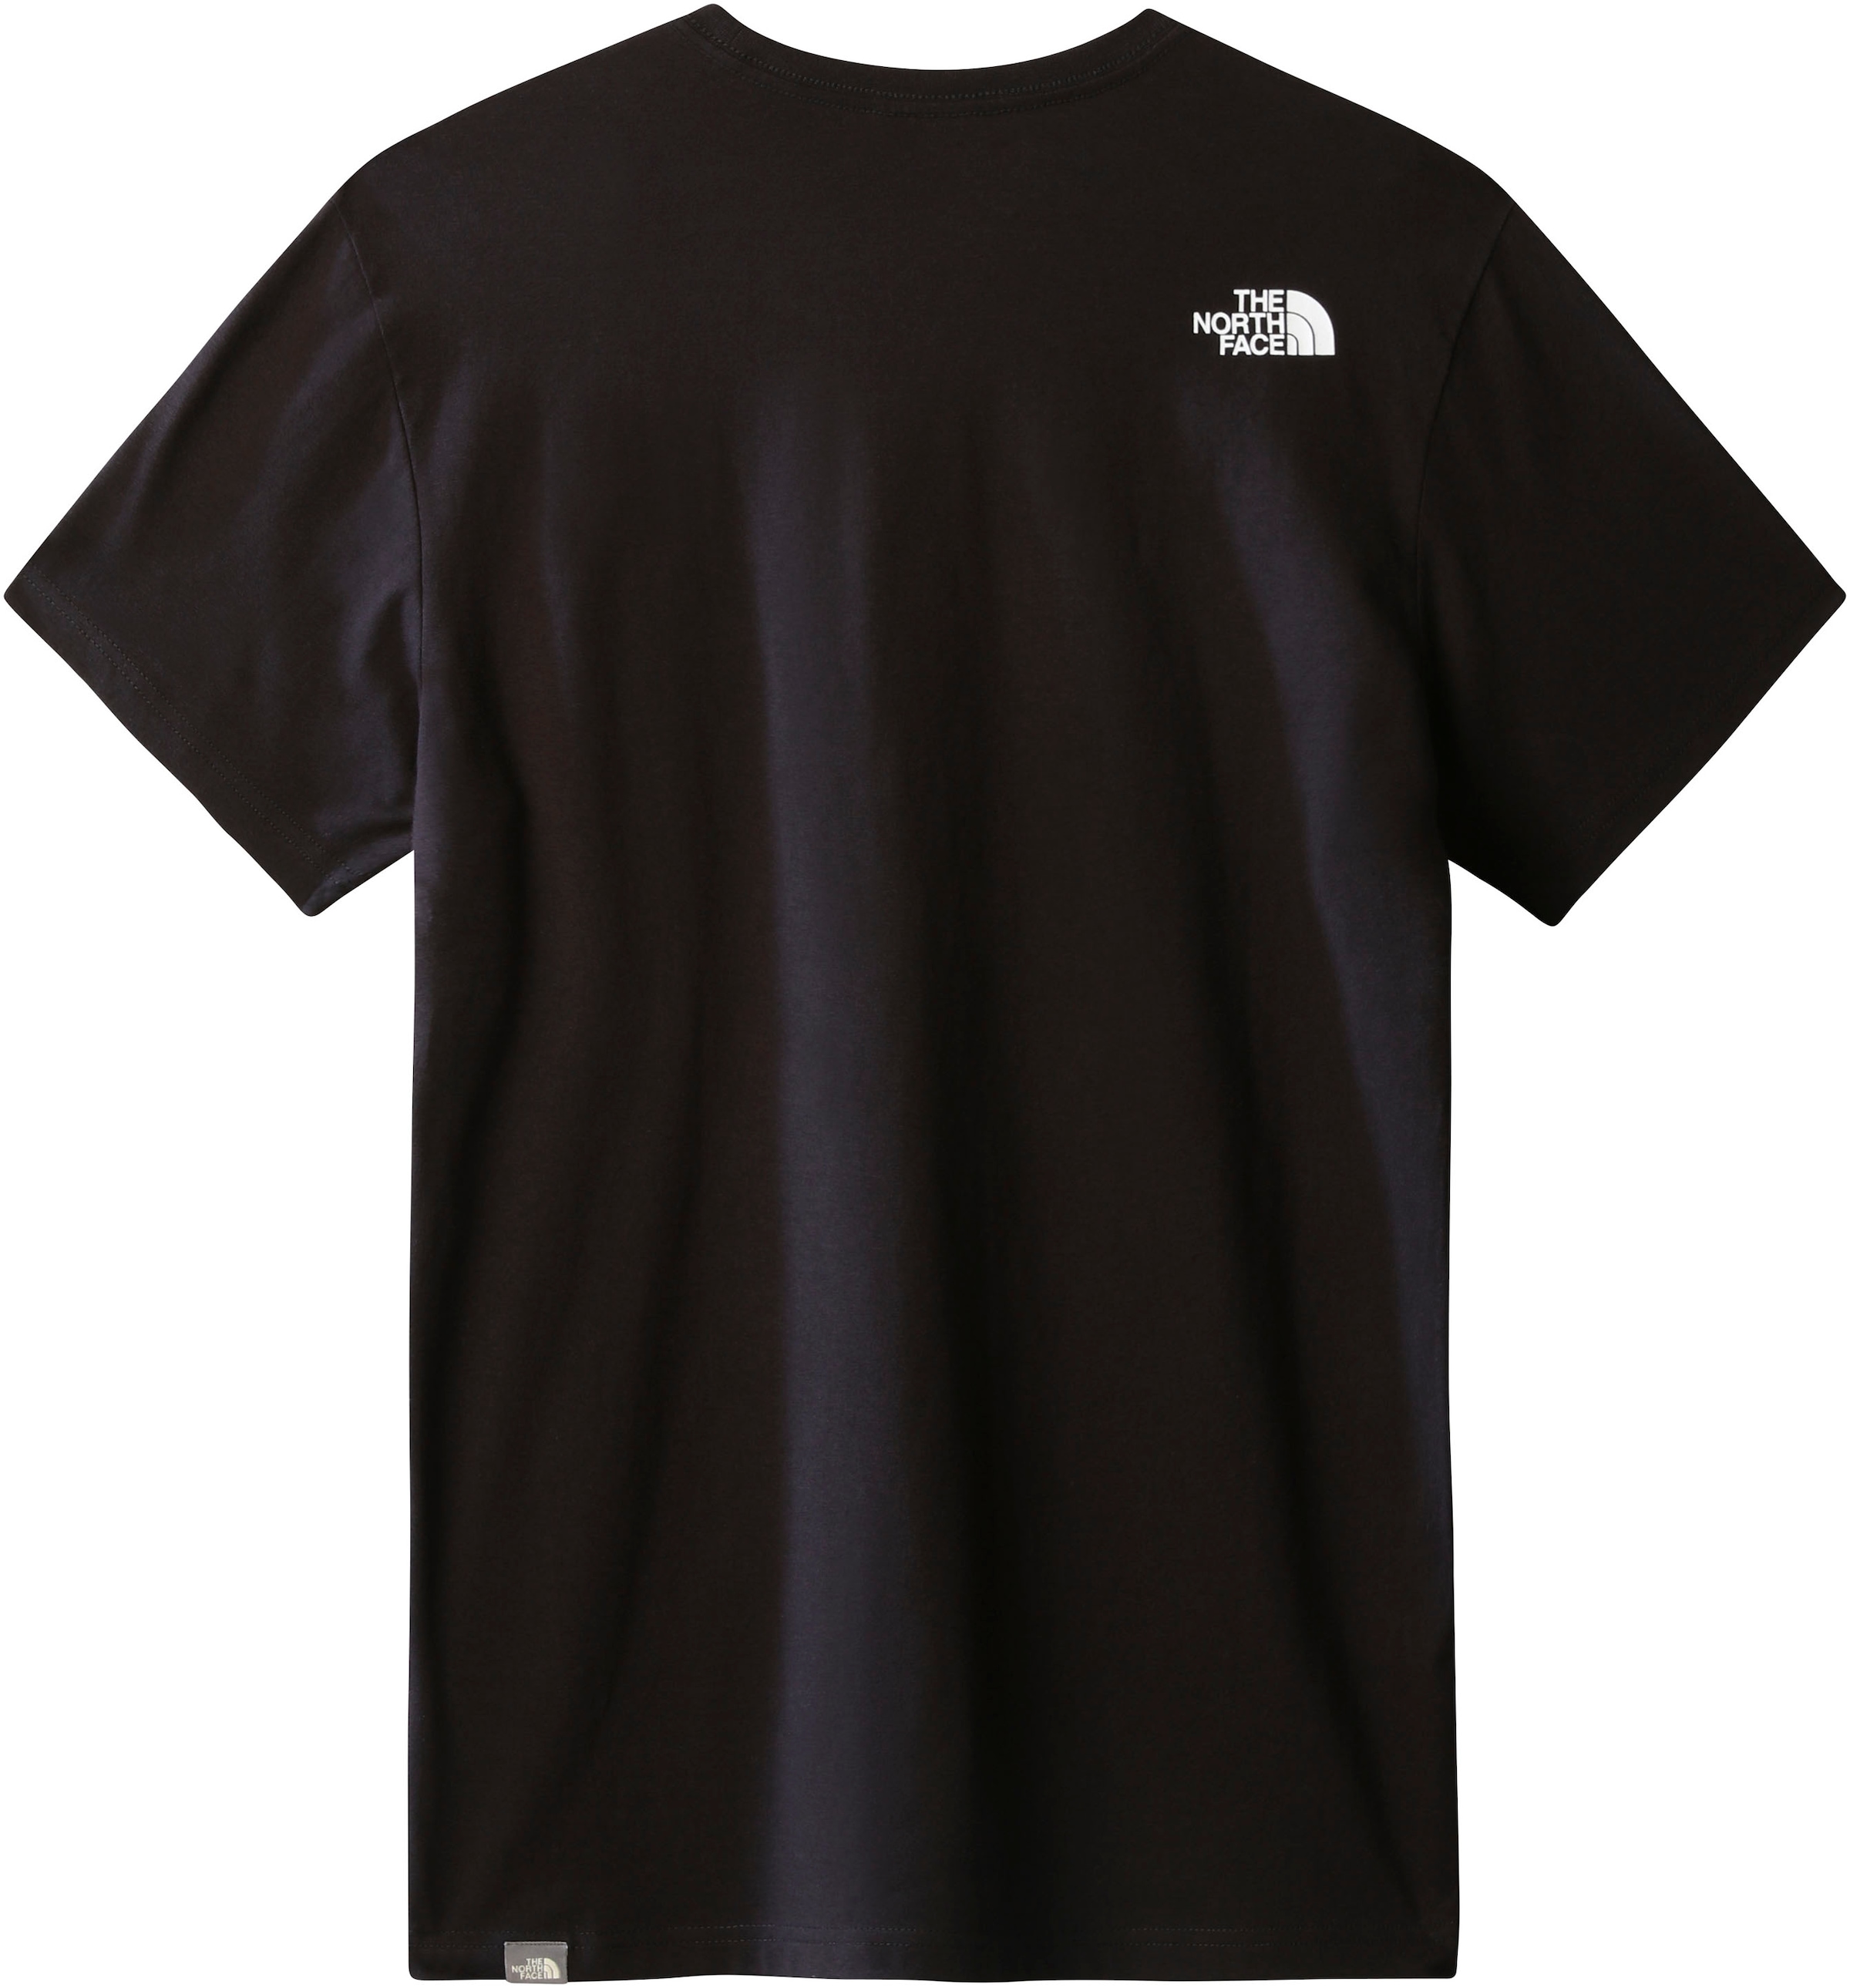 The STOP EXPLORING TEE« North Face »NEVER bei T-Shirt